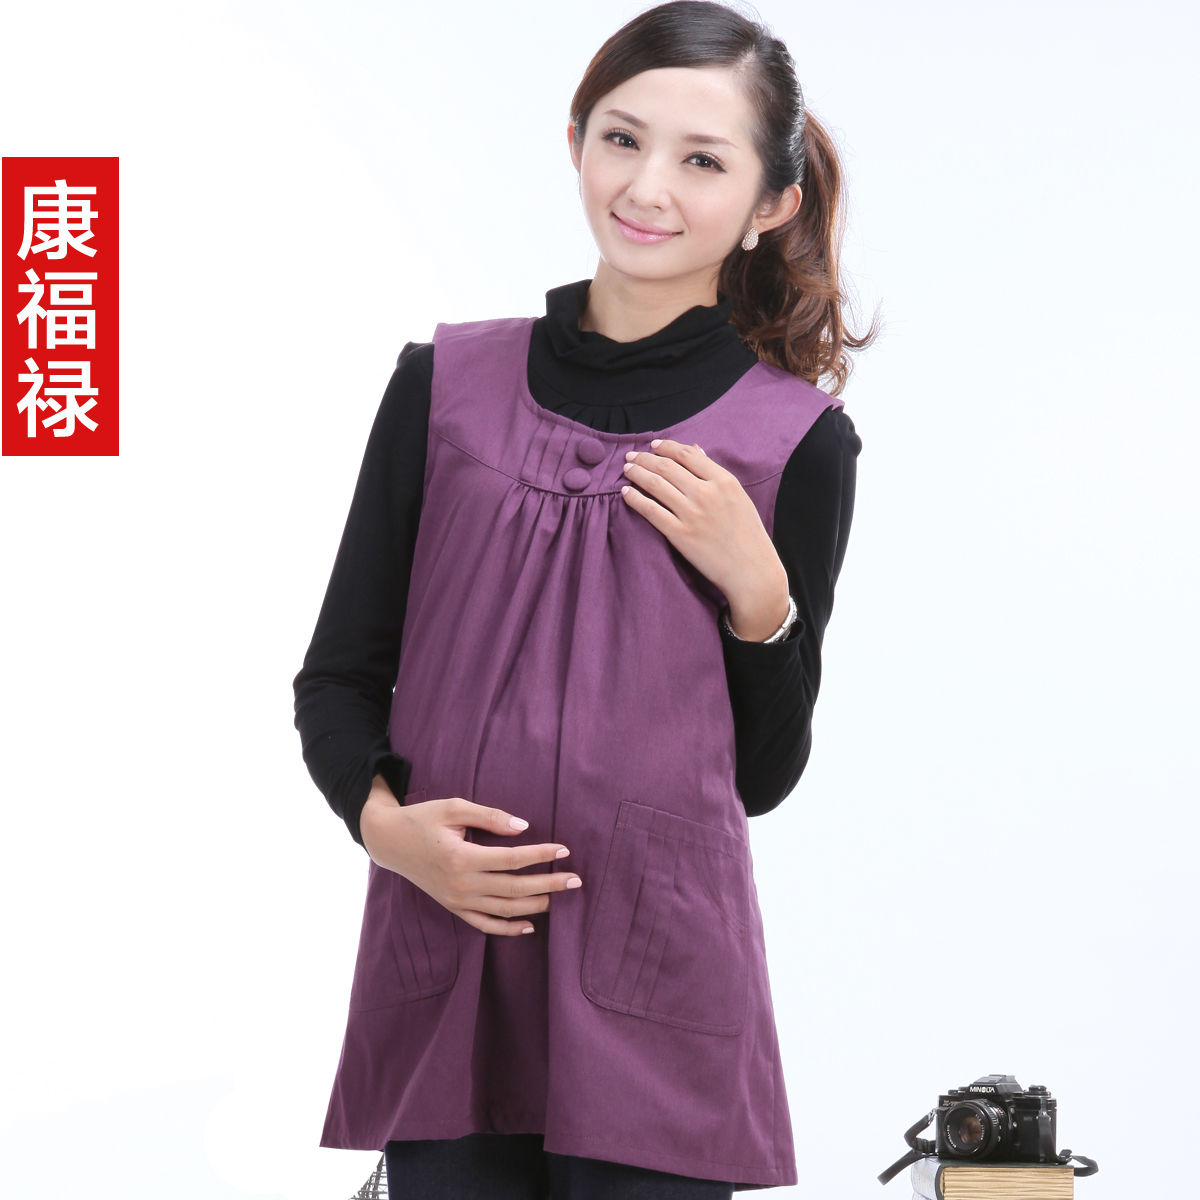 promotion! Radiation-resistant vest skirt autumn and winter radiation-resistant maternity clothing free shipping